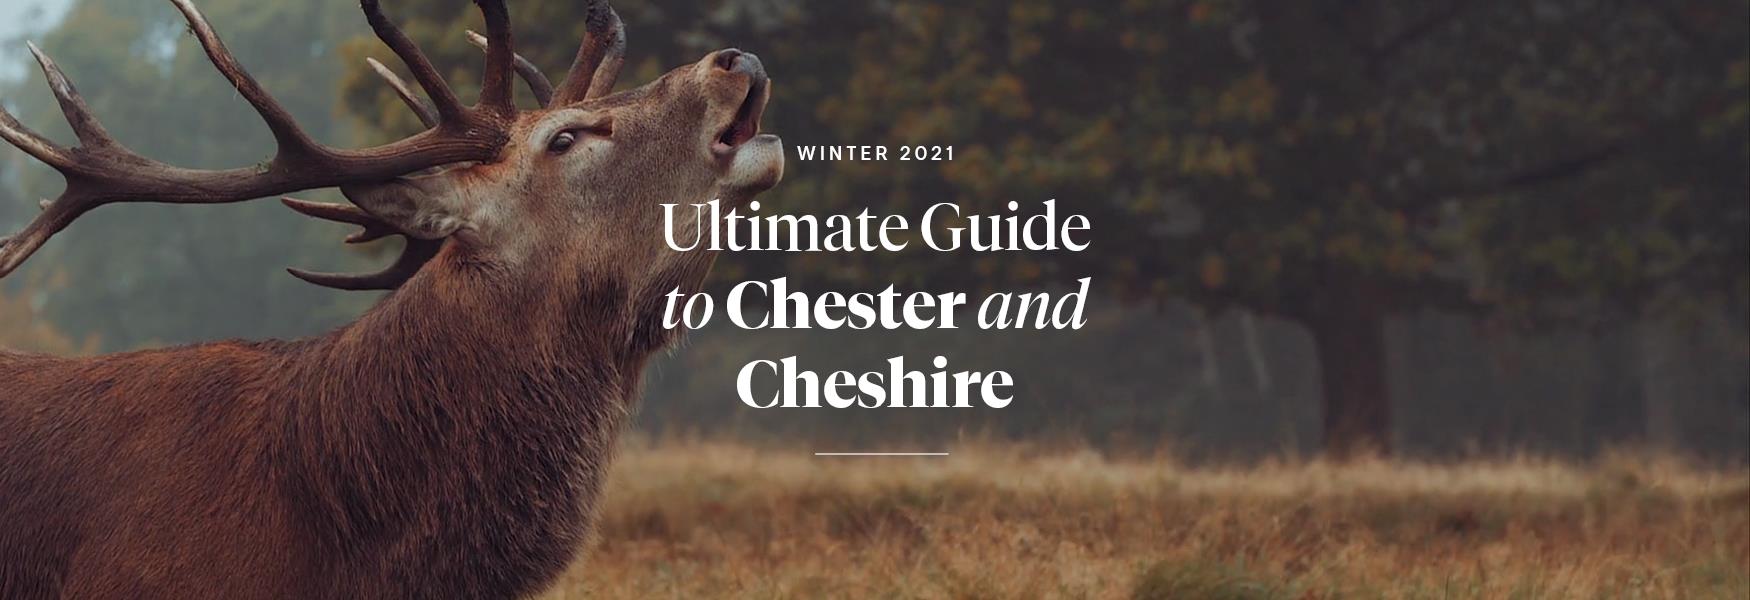 The Ultimate Guide to Chester & Cheshire